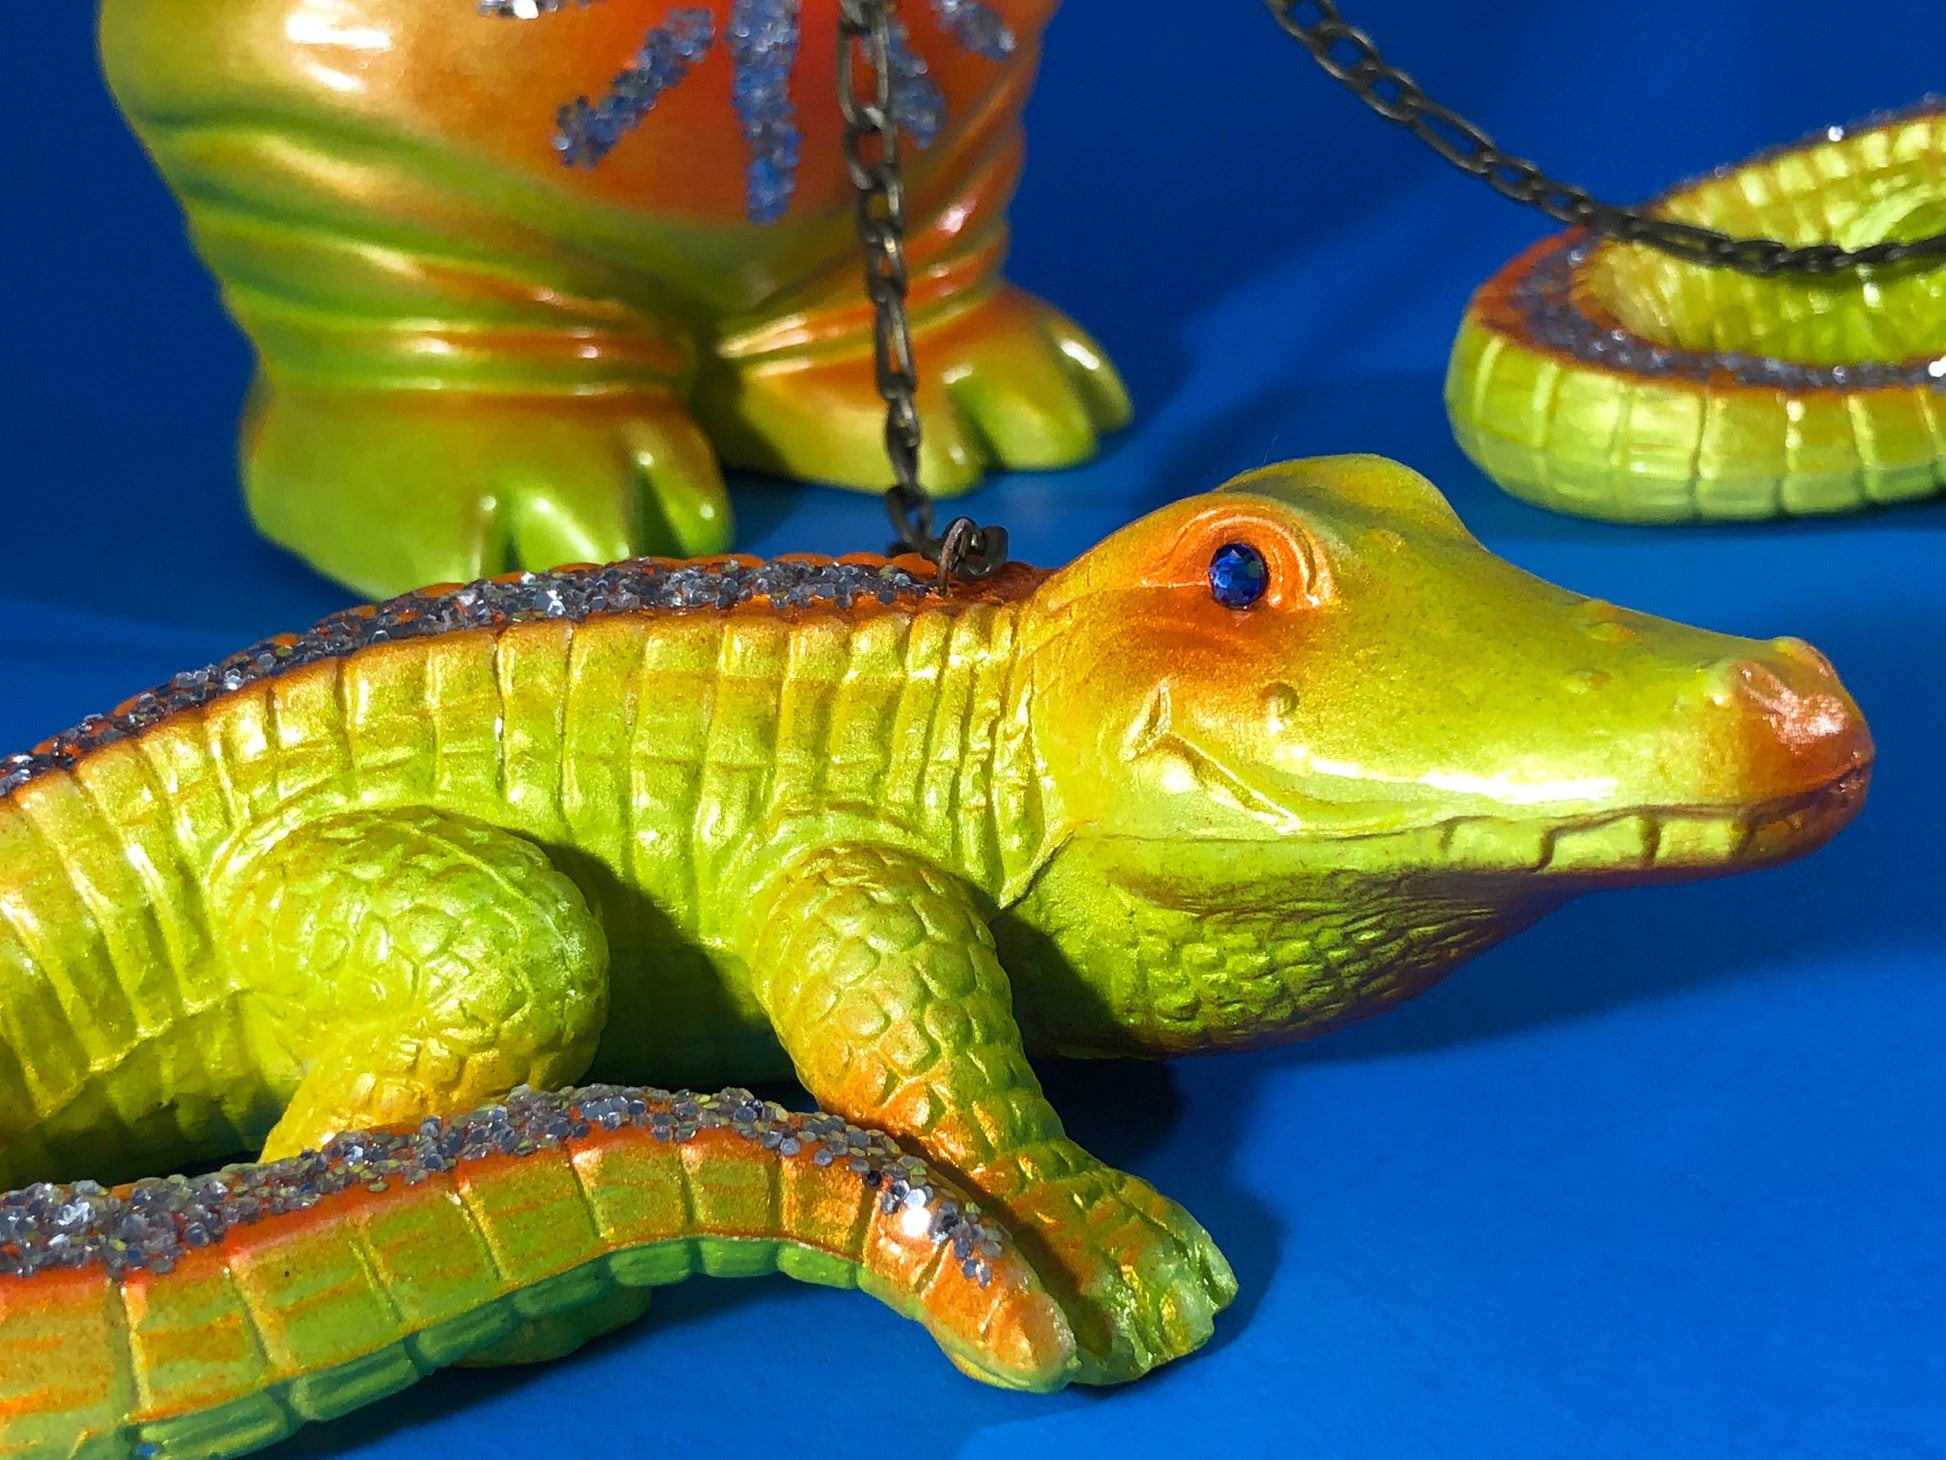 Stomachache and headache ET with crocodiles: Yellow and orange with glitter and chains